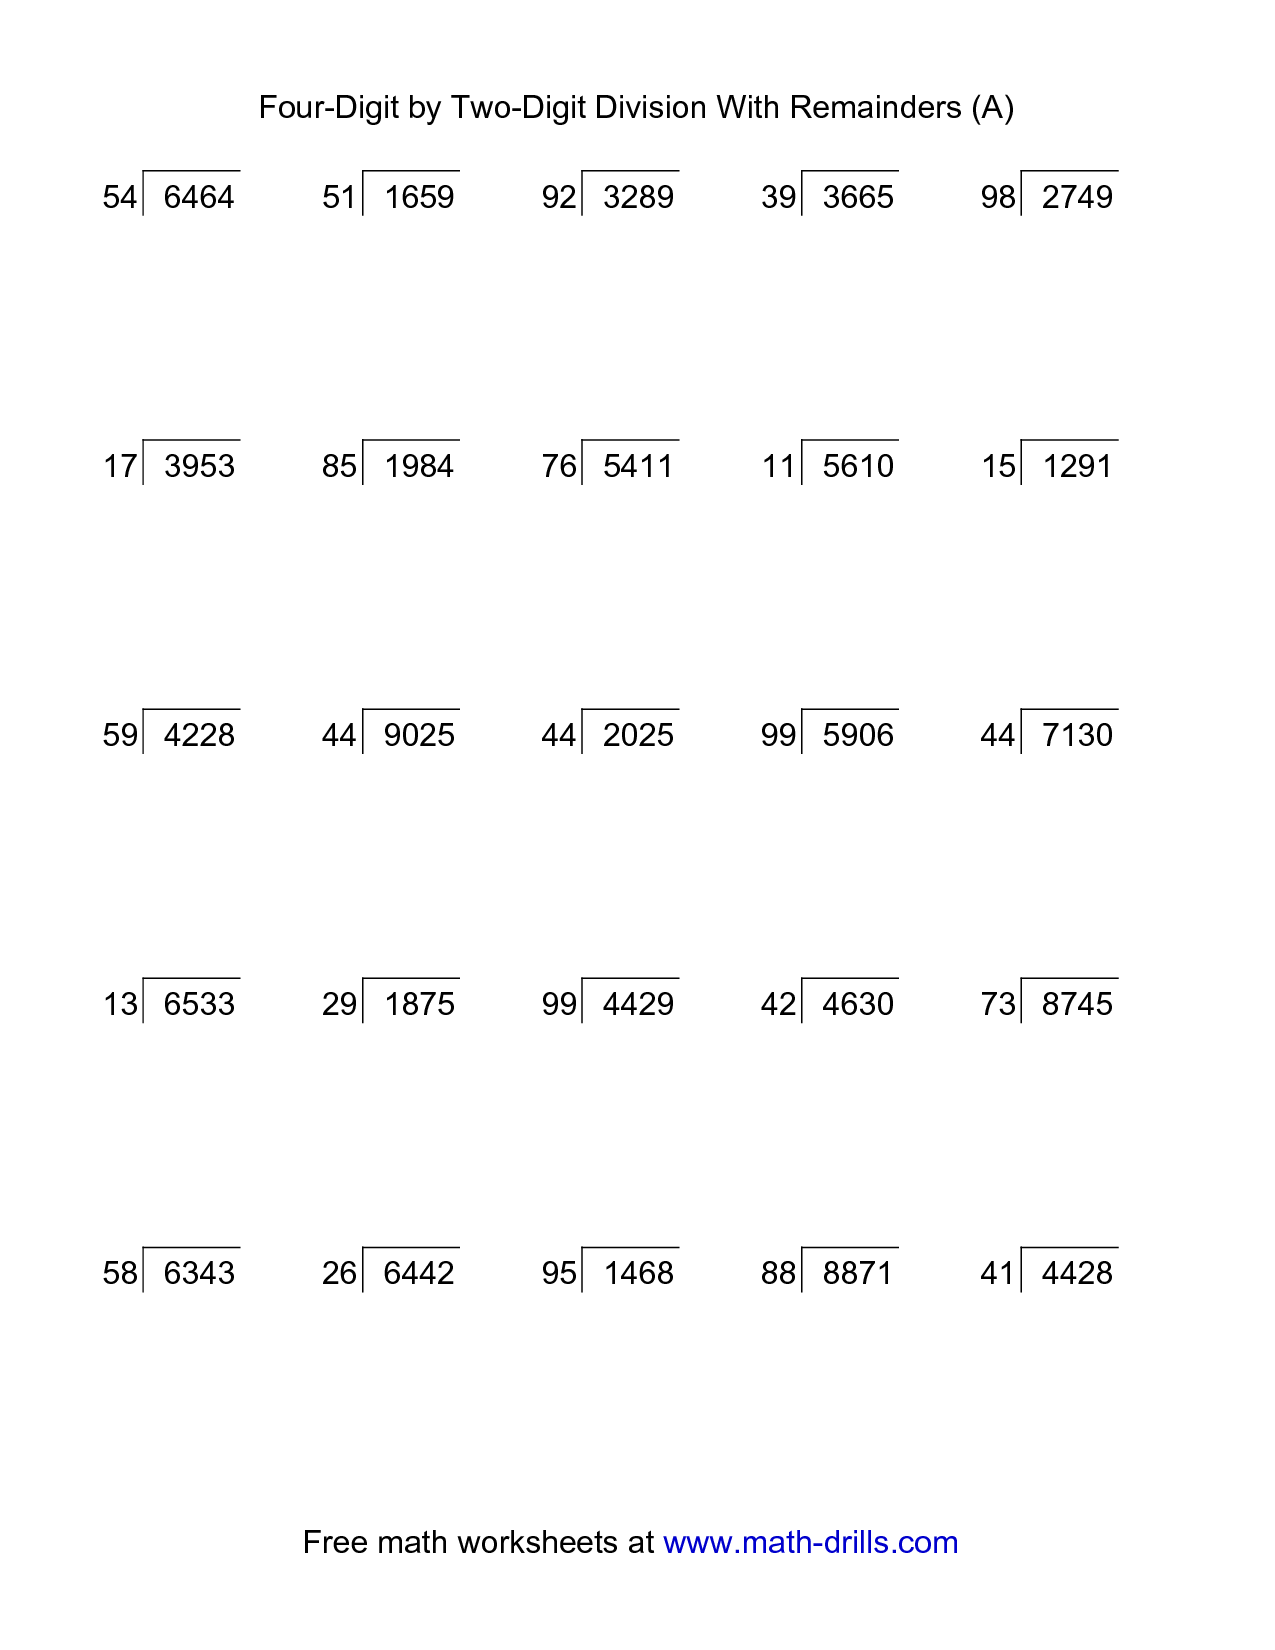 2-Digit Division with Remainders Worksheets Image